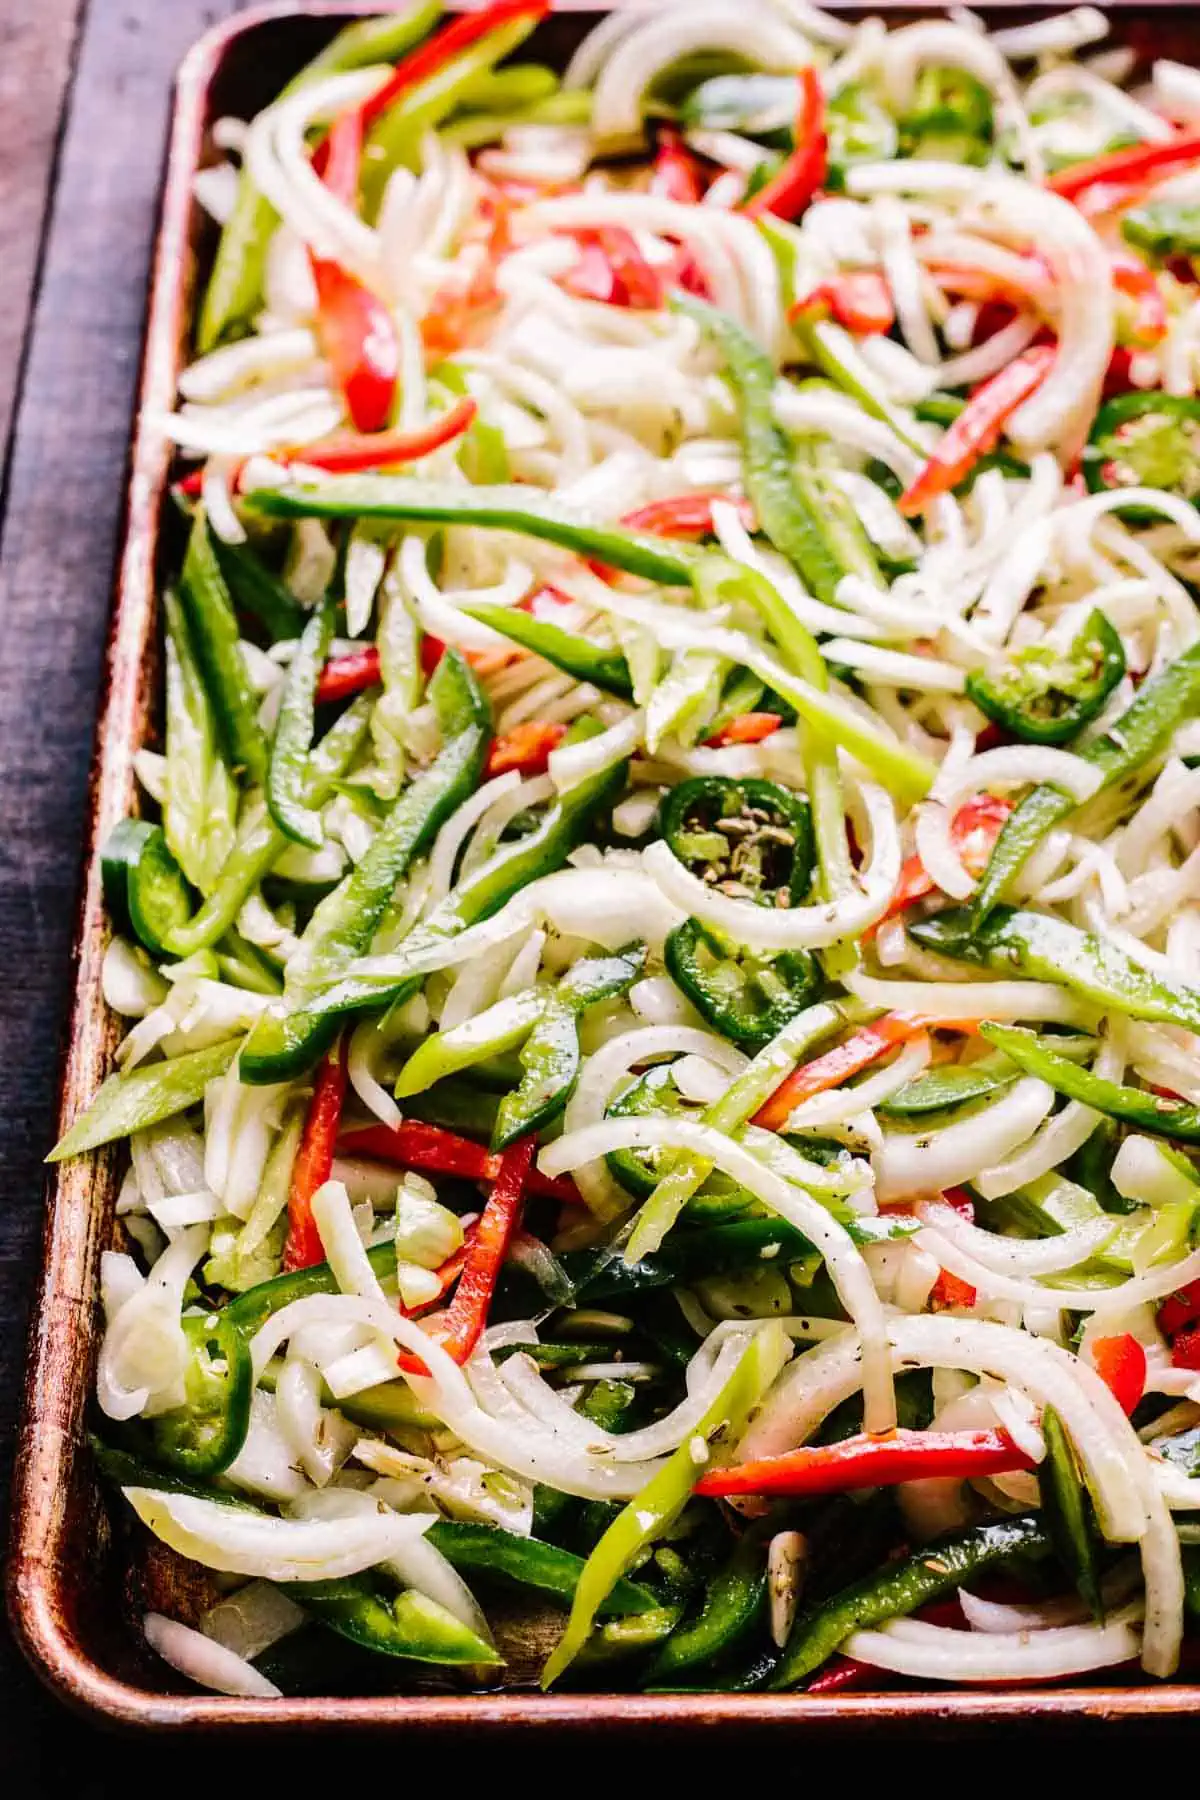 A sheet pan with sliced raw green and red peppers and white onions.